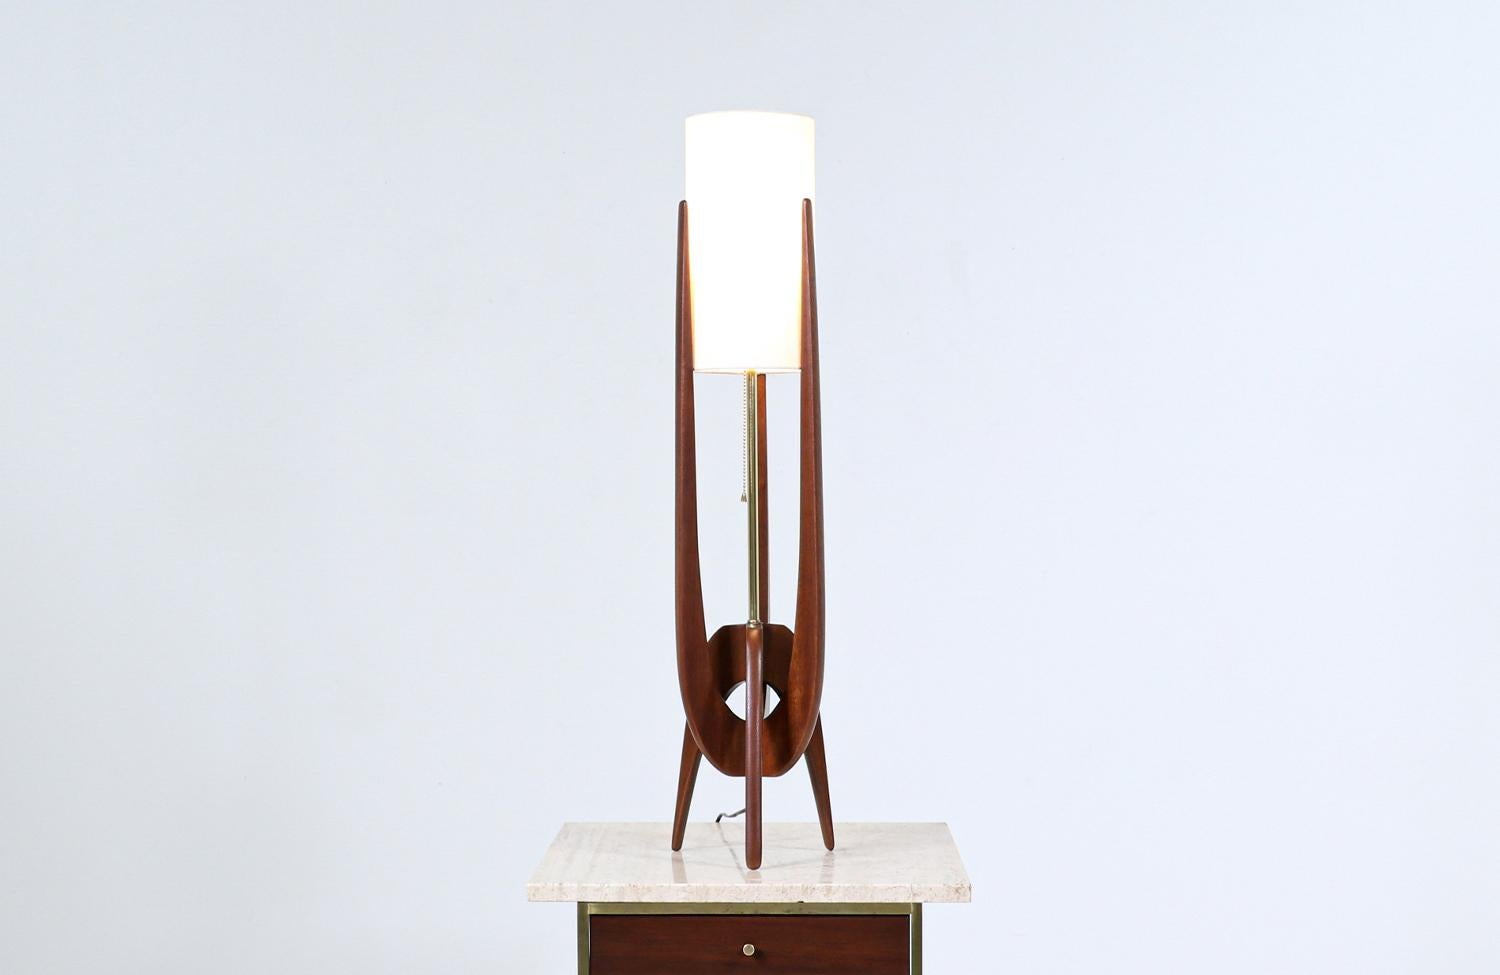 California Modernist sculpted table lamp by Modeline of CA.